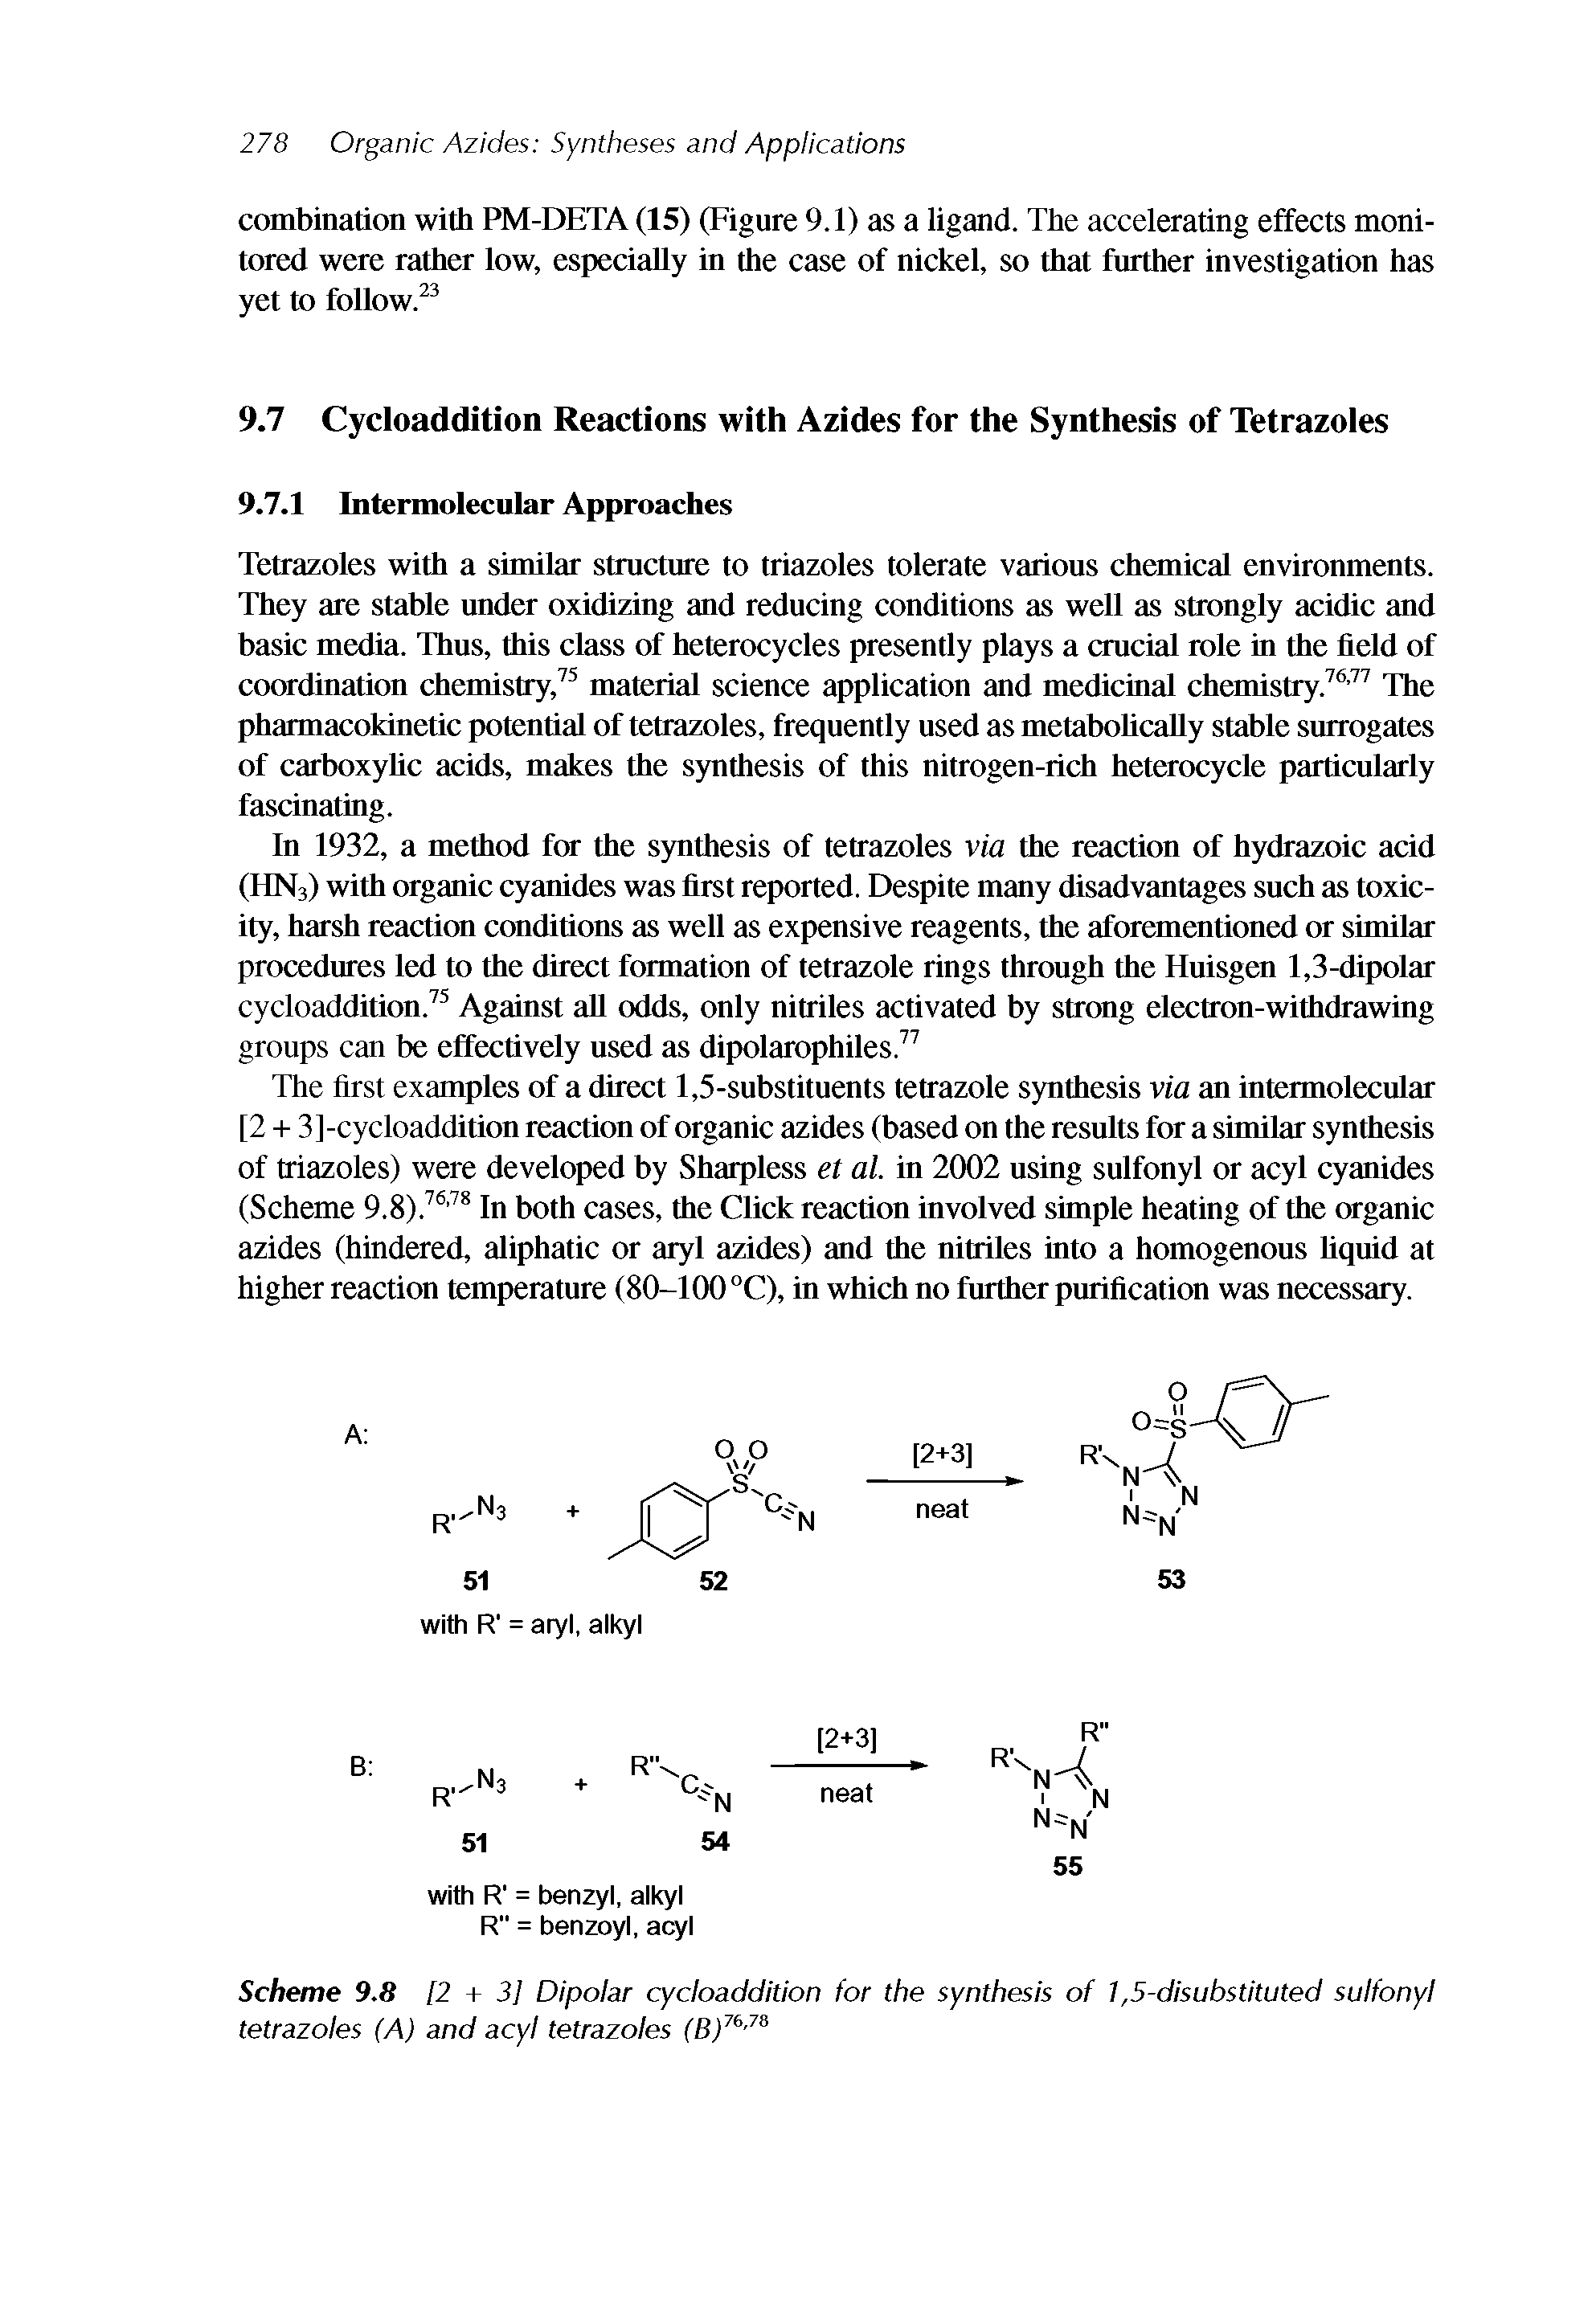 Scheme 9.8 [2 + 3] Dipolar cycloaddition for the synthesis of 1,5-disubstituted sulfonyl tetrazoles (A) and acyl tetrazoles...